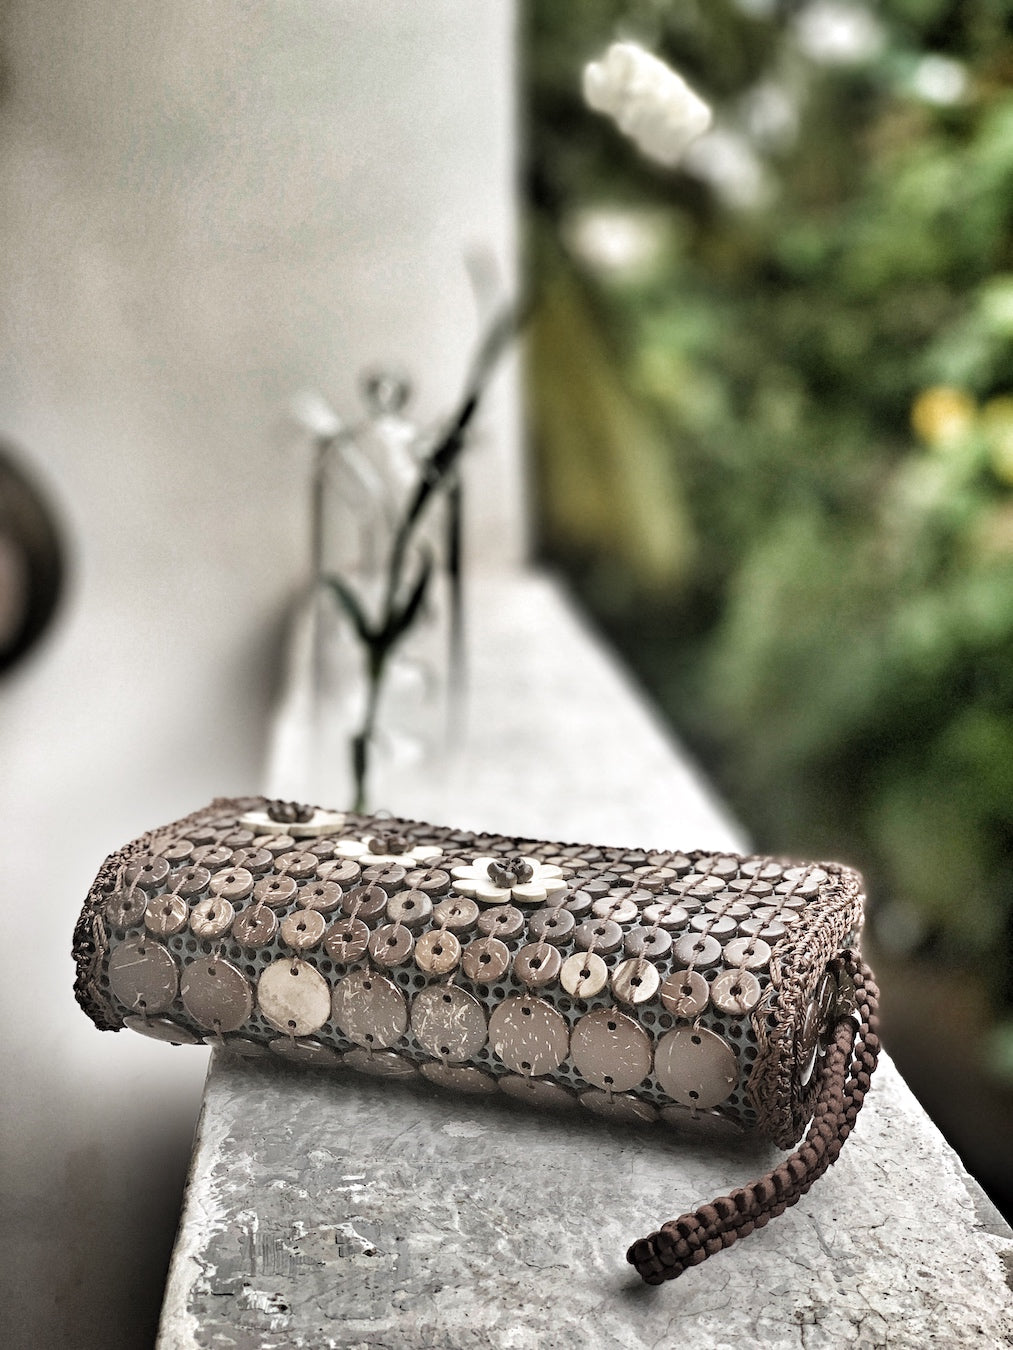 DaisyLife natural coconut shell brown wristlet clutch bag with white flowers